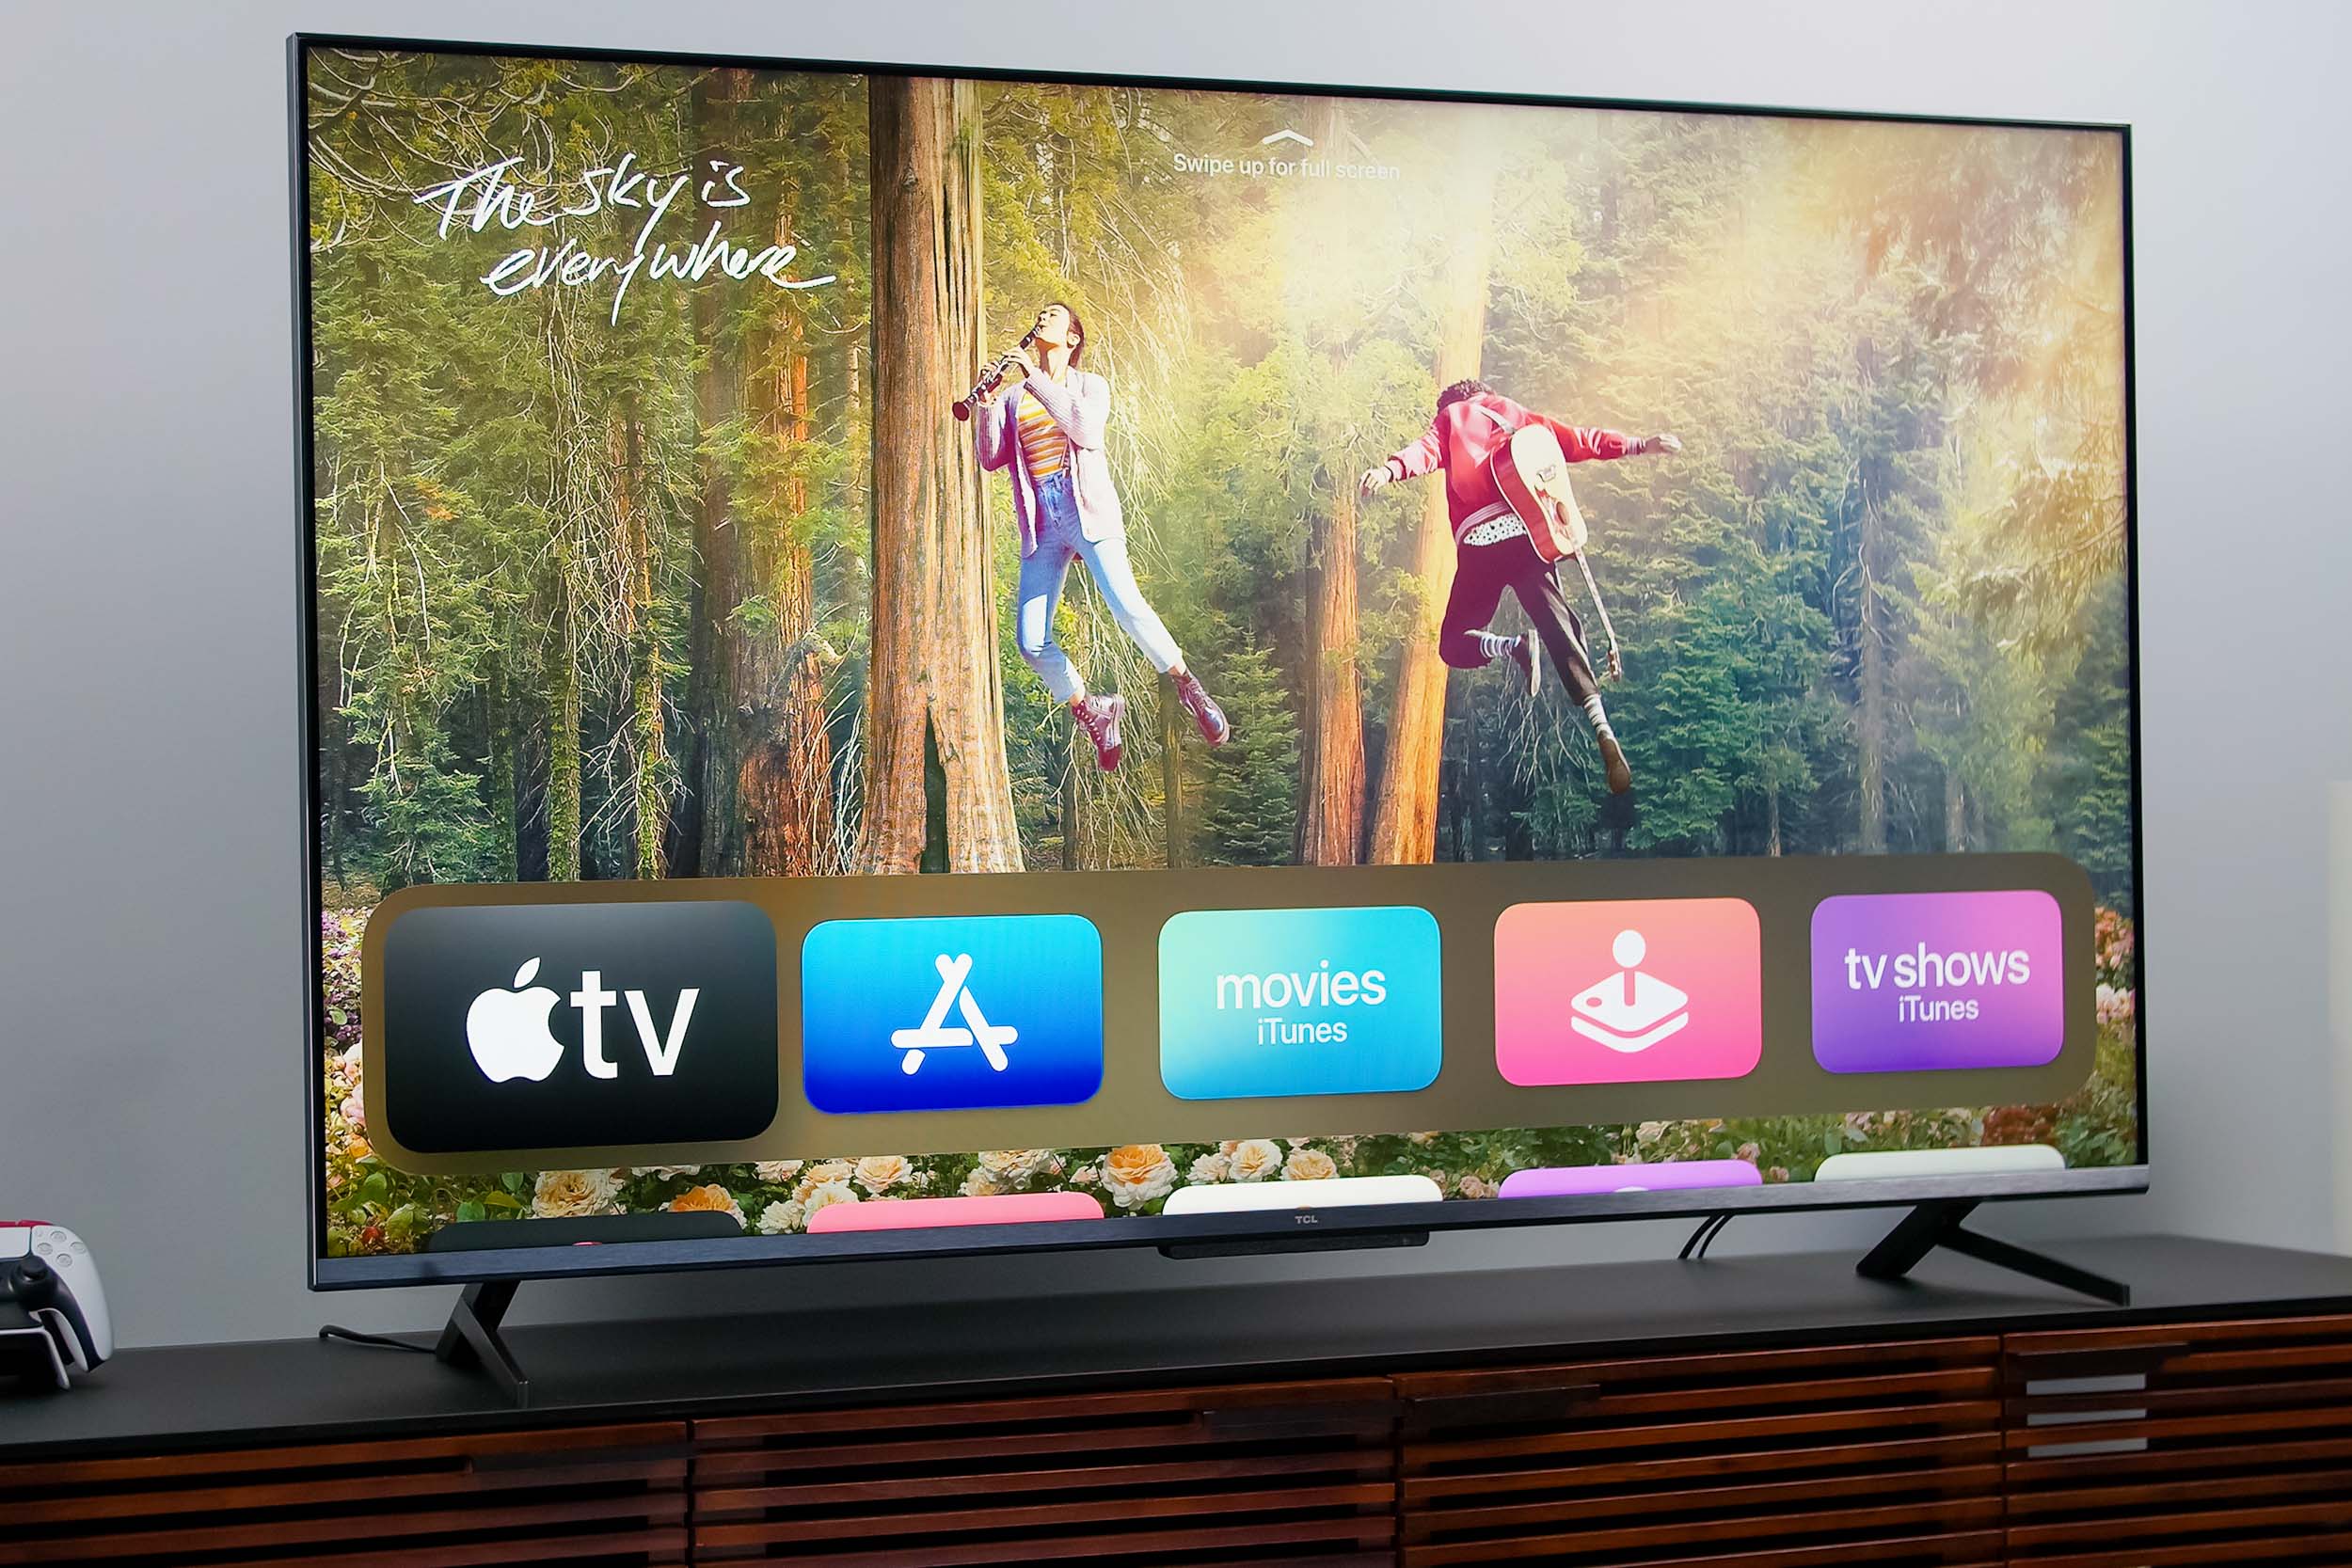 What Is AirPlay? Apple's Powerful Wireless Media Sharing Explained